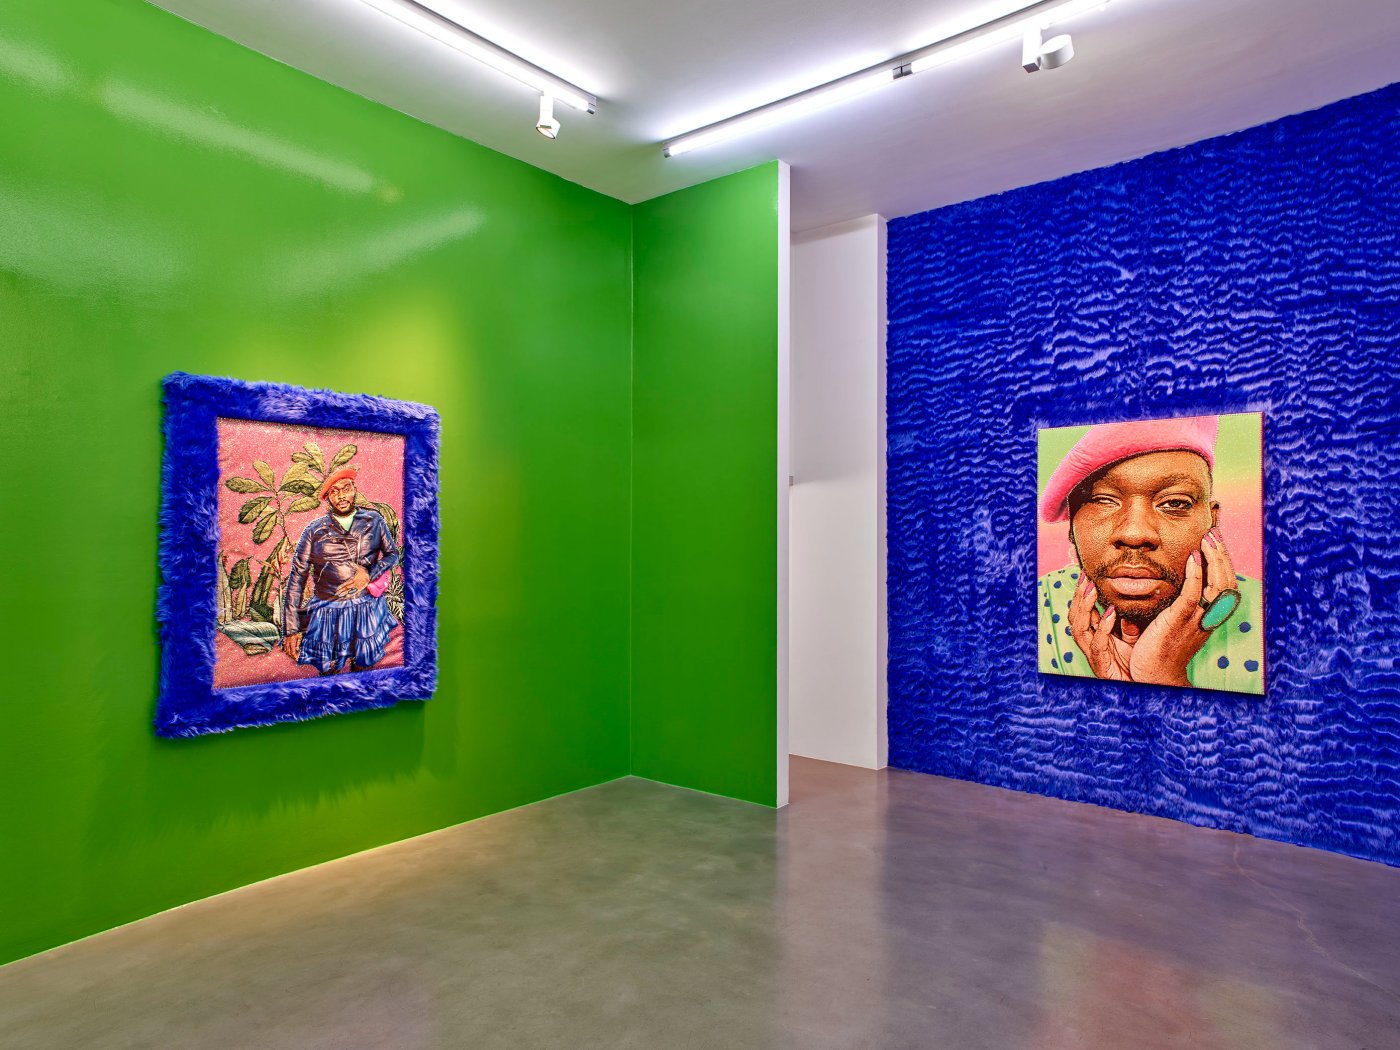 Installation image for April Bey: I Believe in Why I'm Here, at Simon Lee Gallery